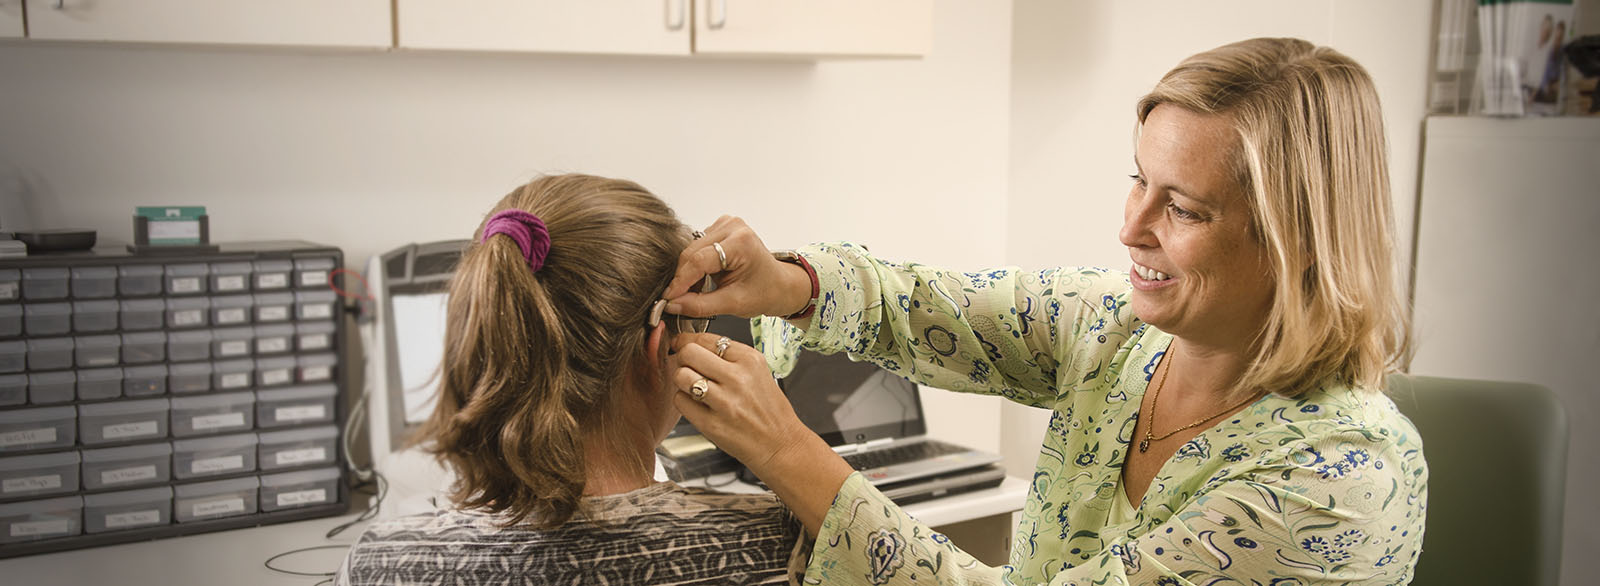 Audiologist Laura Burger fitting a patient with a hearing aid